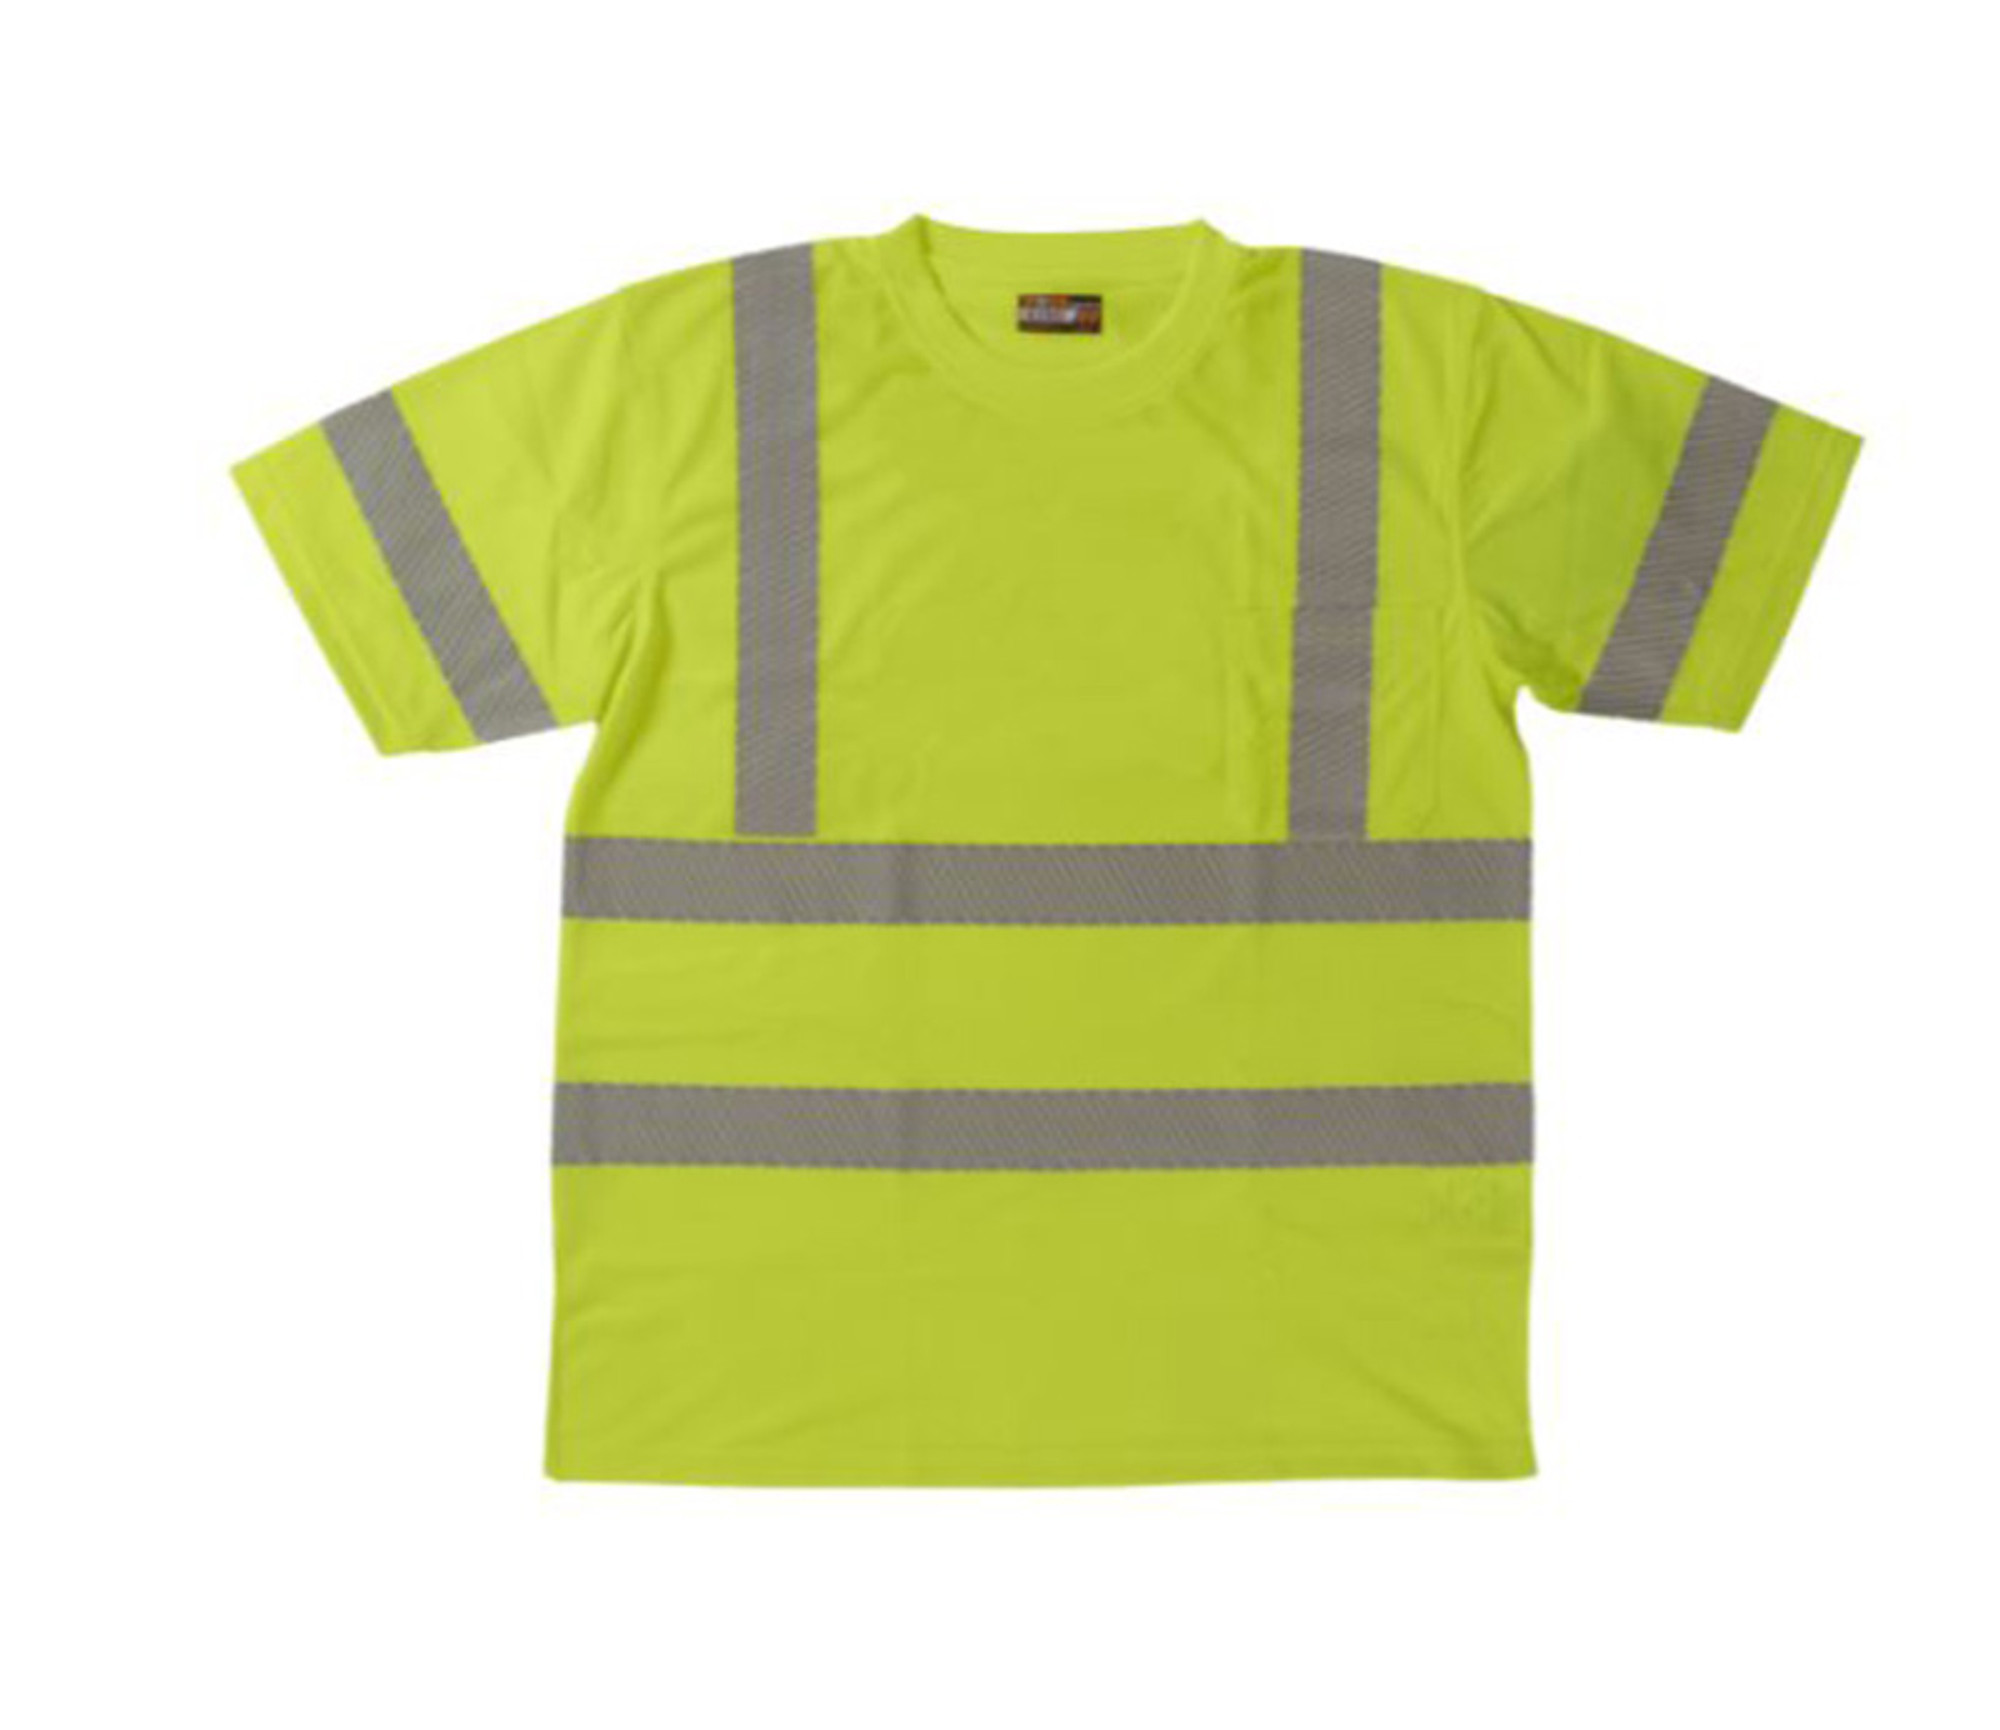 S/S Safety T-Shirt with Segmented Stripes (Fluorescent Green) - 4 Pack